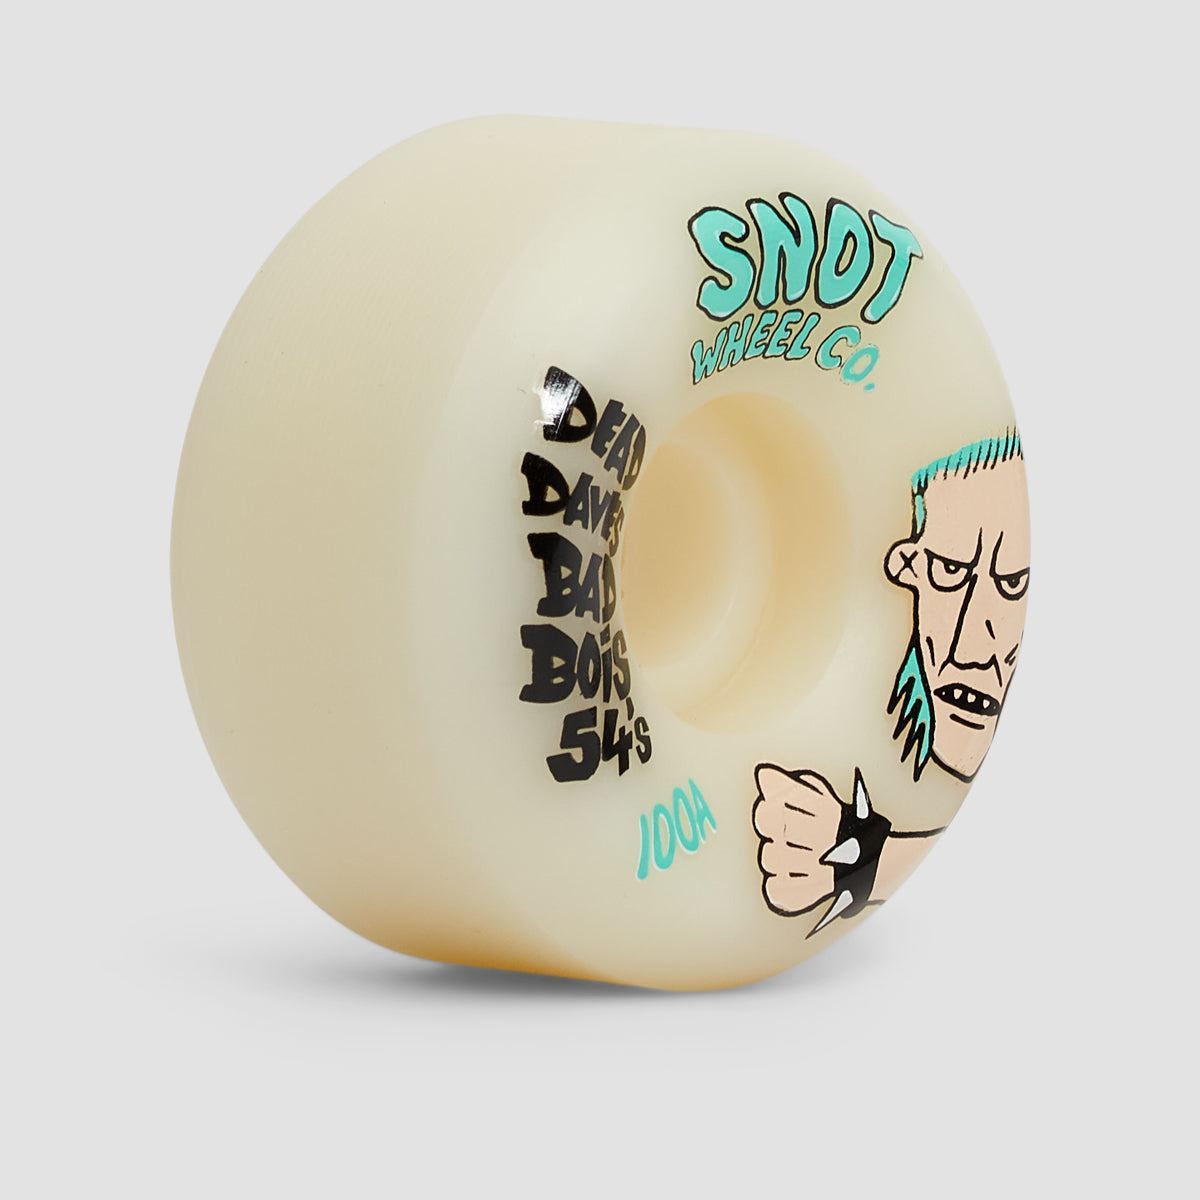 Snot Dead Daves Bad Boys 100A Conical Wheels Raw 54mm